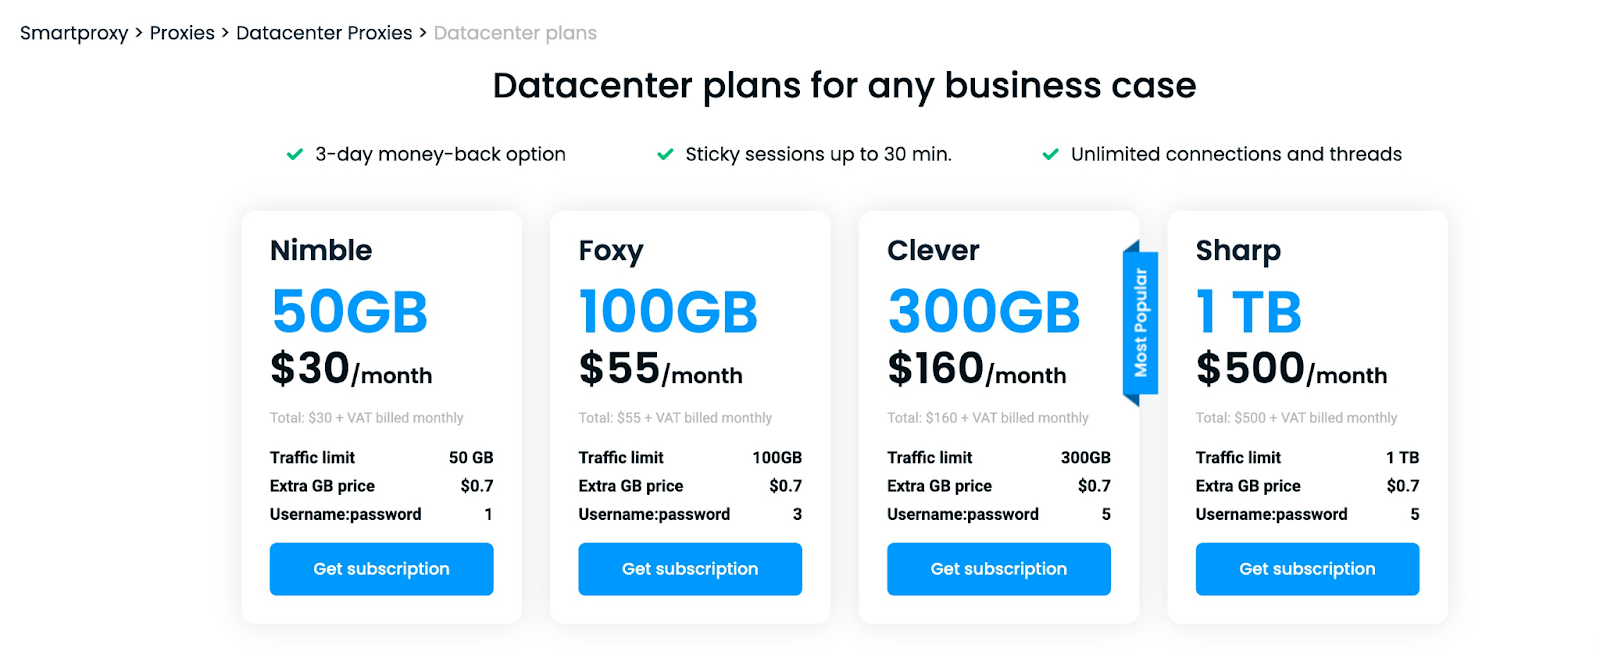 Datacenter plans for any business case by smartproxy